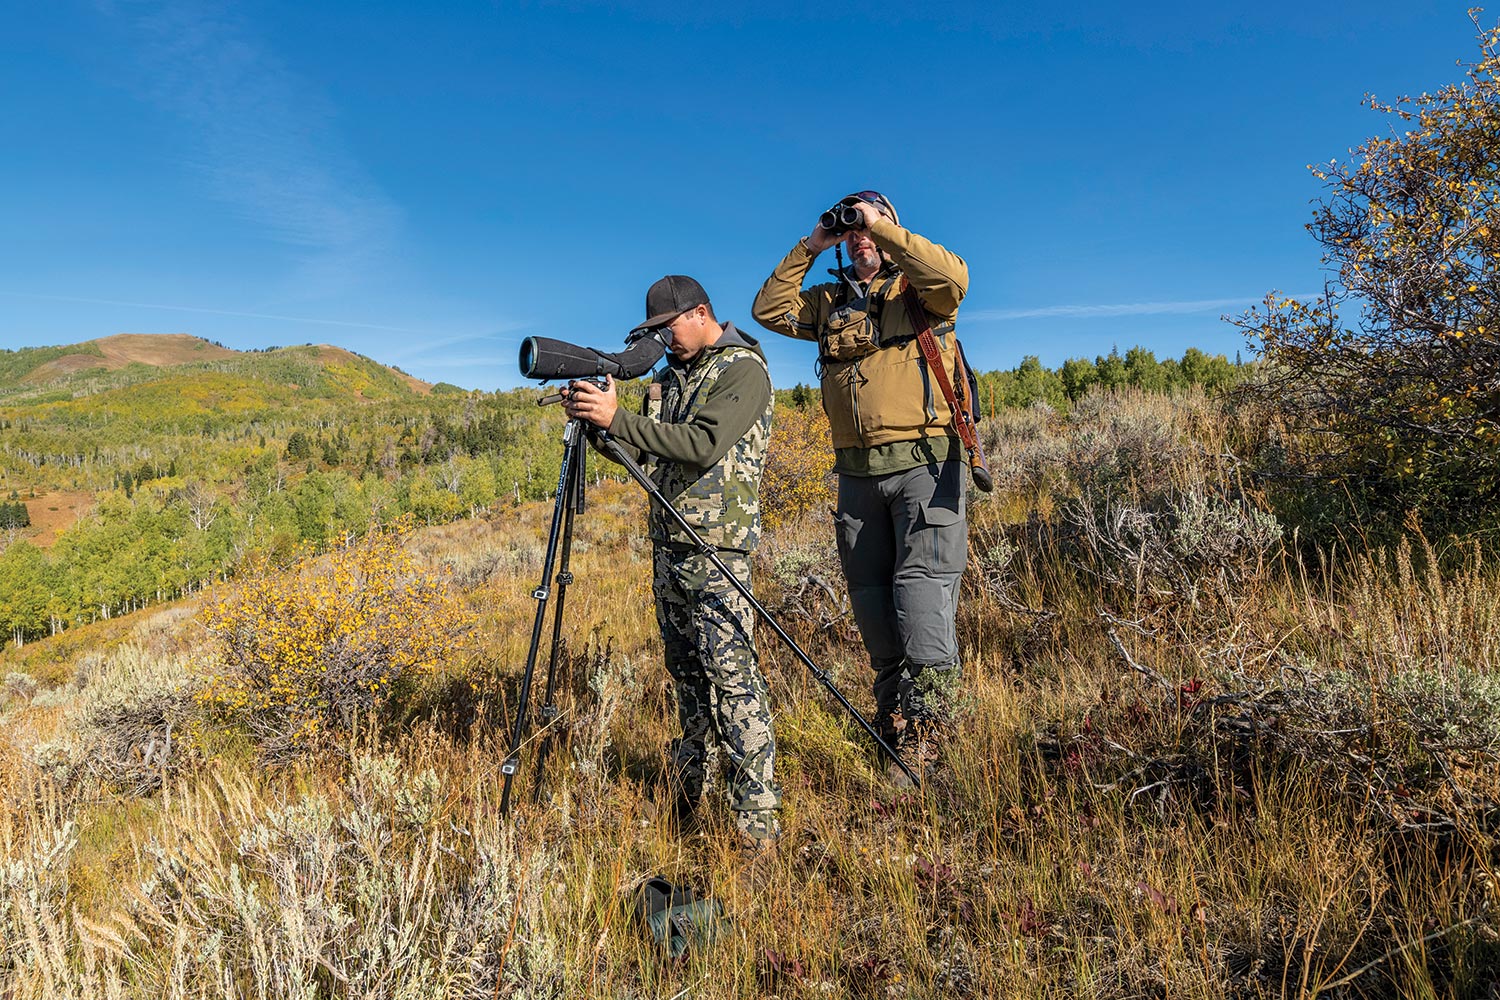 Hunter and guide use binoculars and spotting scope to glass for moose from hillside with low vegetation.